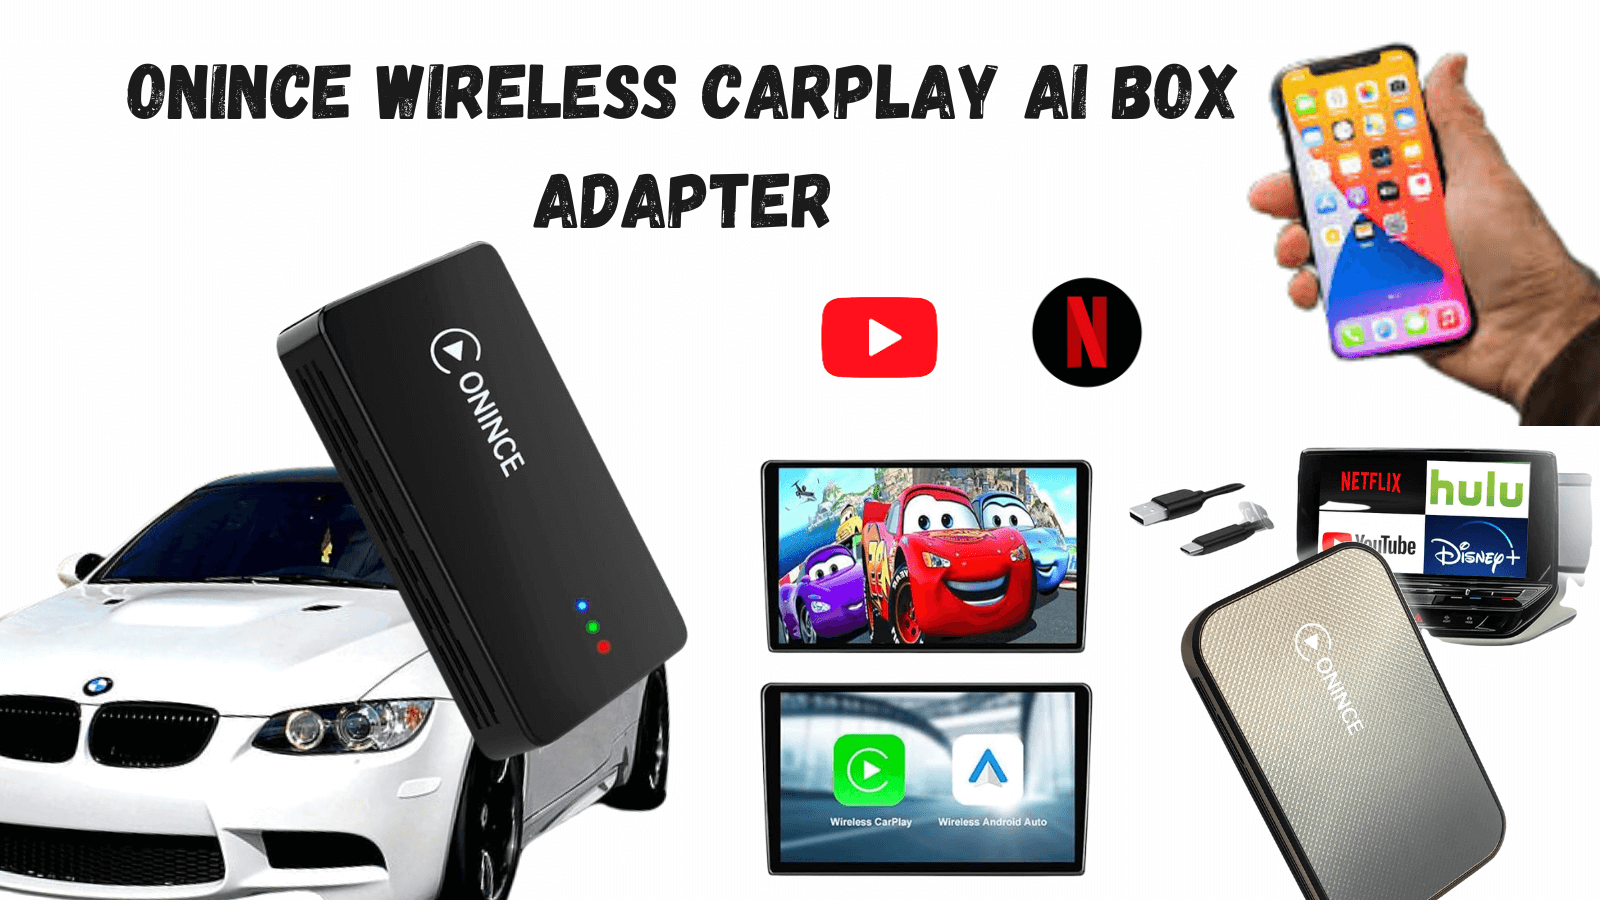 Onince wireless Adapter for Youtube and Netflix Streaming